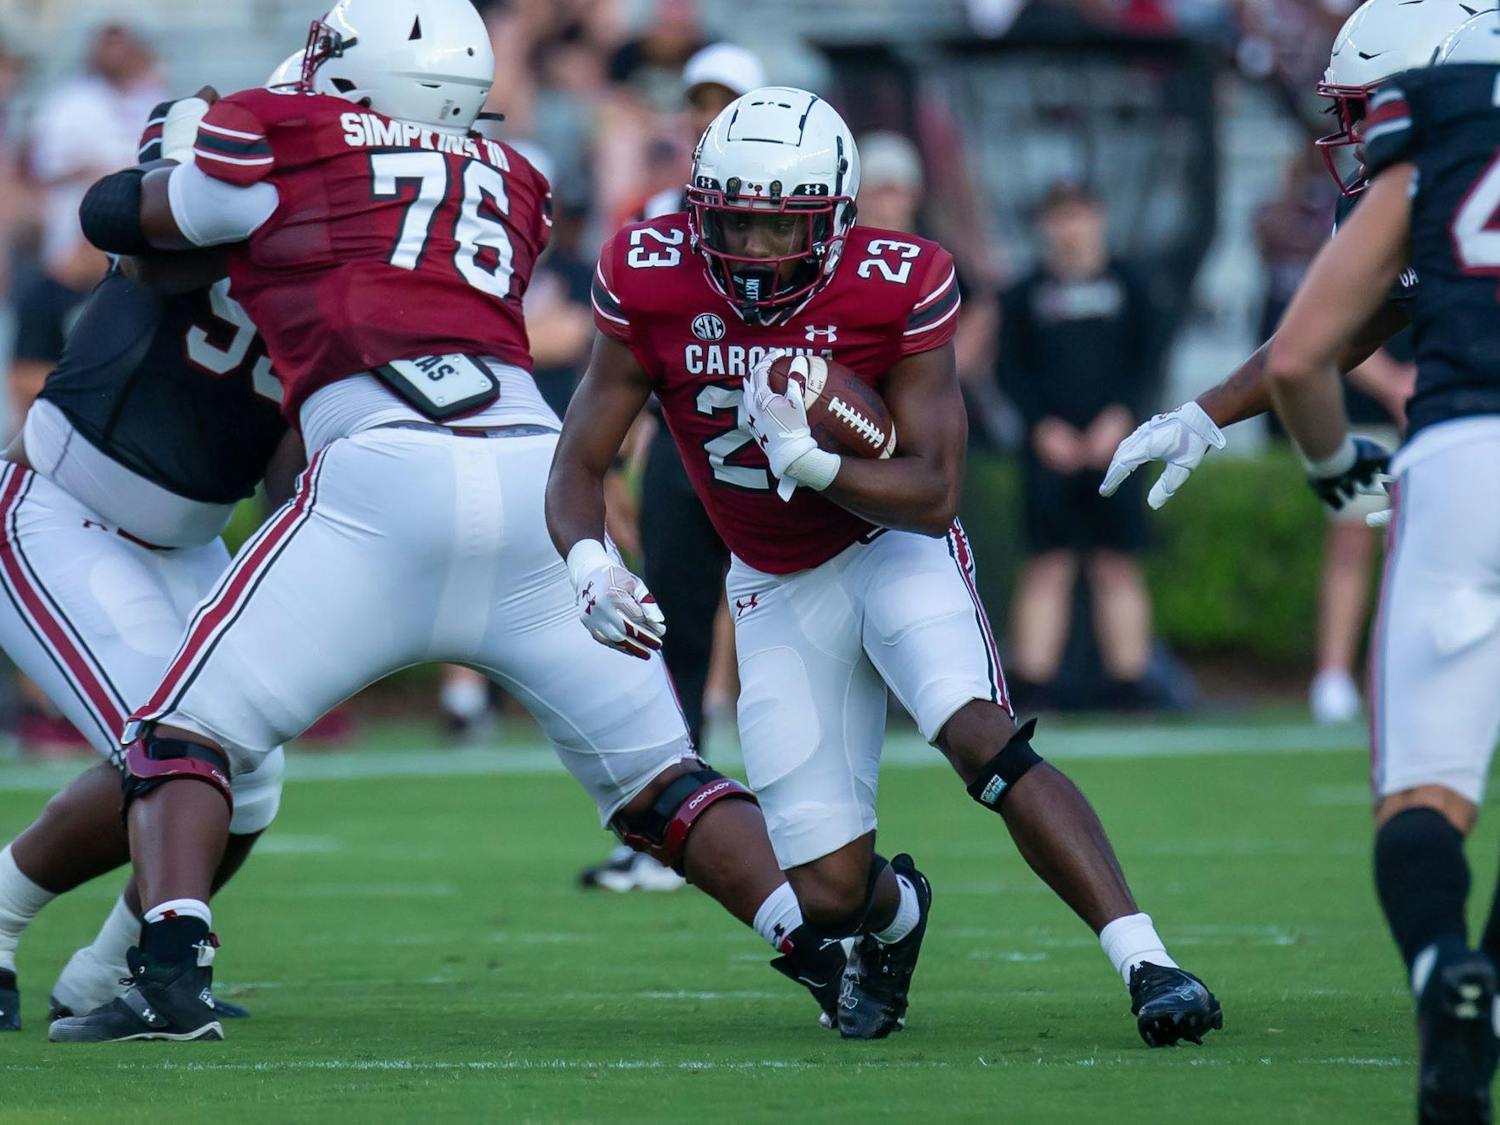 Sophomore running back Djay Braswell carries the ball during the 2024 Garnet &amp; Black Spring Game at Williams-Brice Stadium on April 20, 2024. Braswell rushed for 26 yards in the Garnet team's 17-0 victory over the Black team.